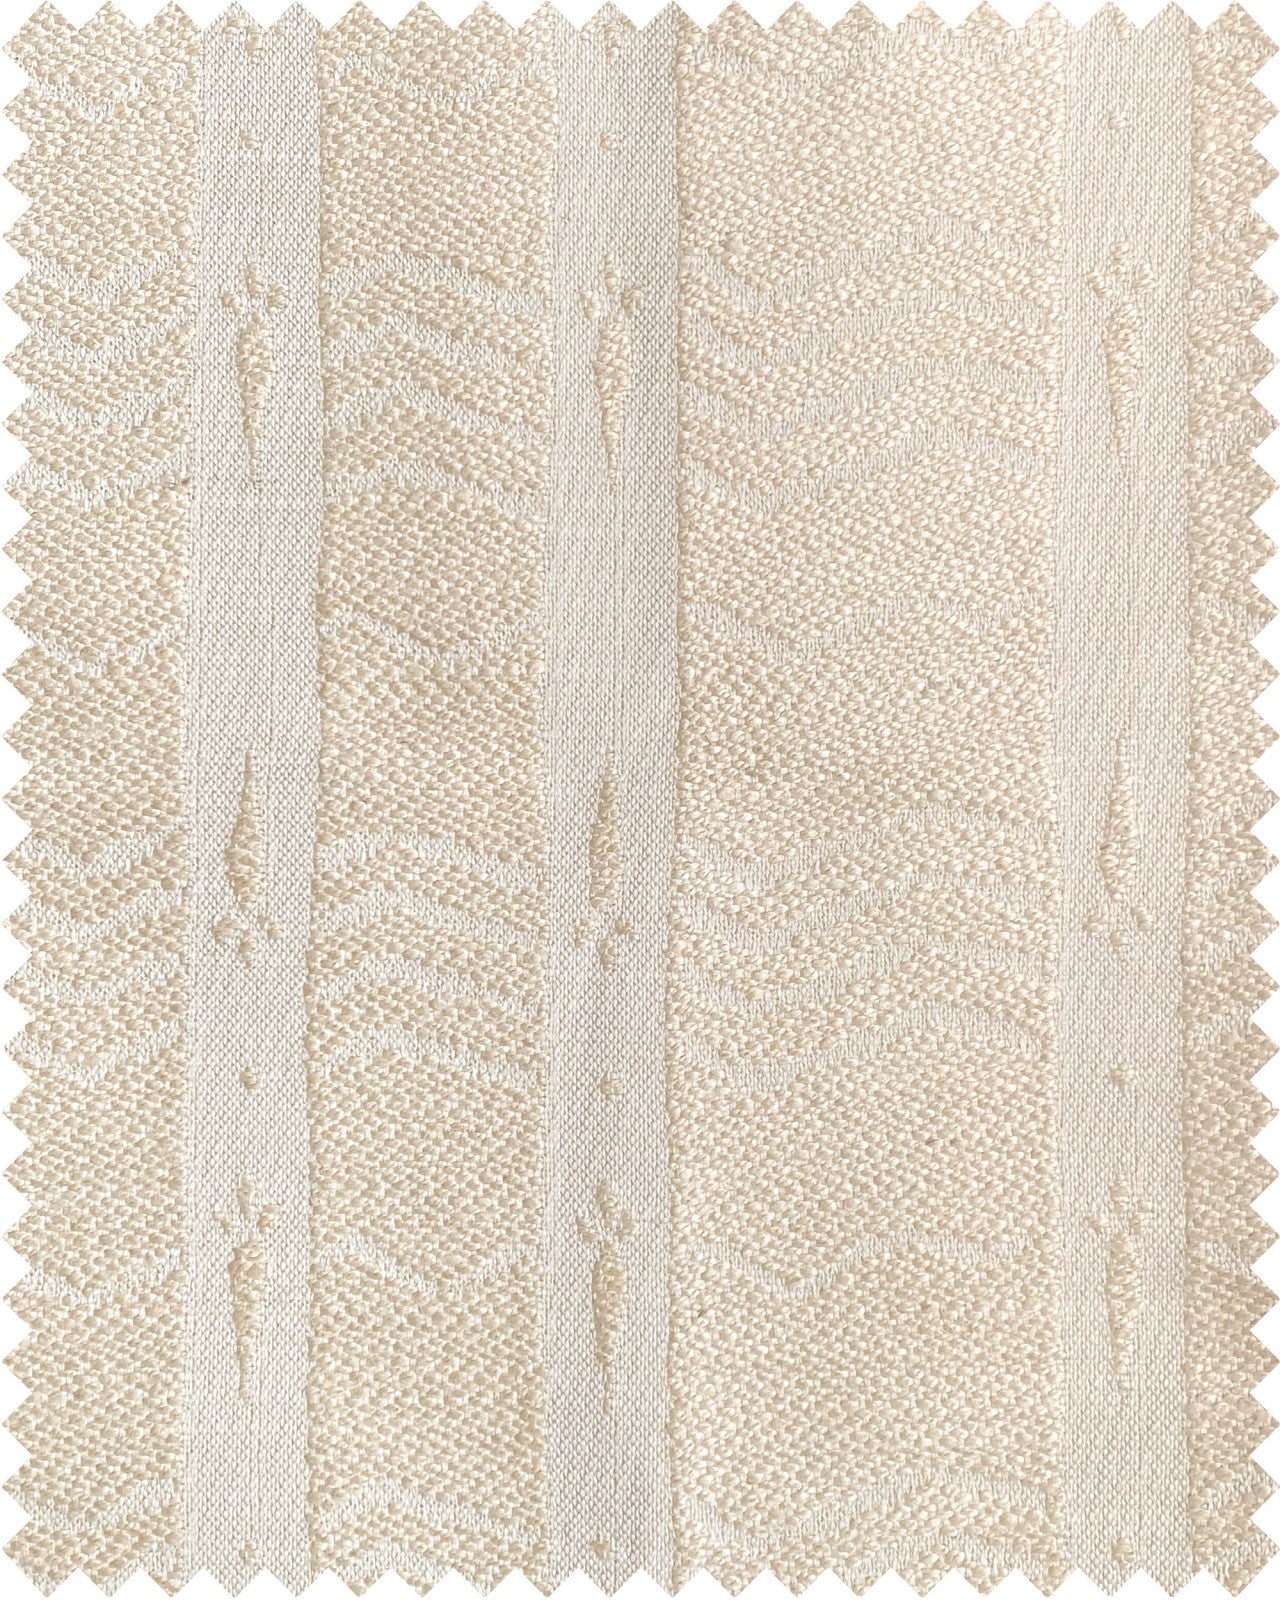 Whitelake Jacquard fabric in white color - pattern number FB00080 - by Mind The Gap in the Woodstock collection